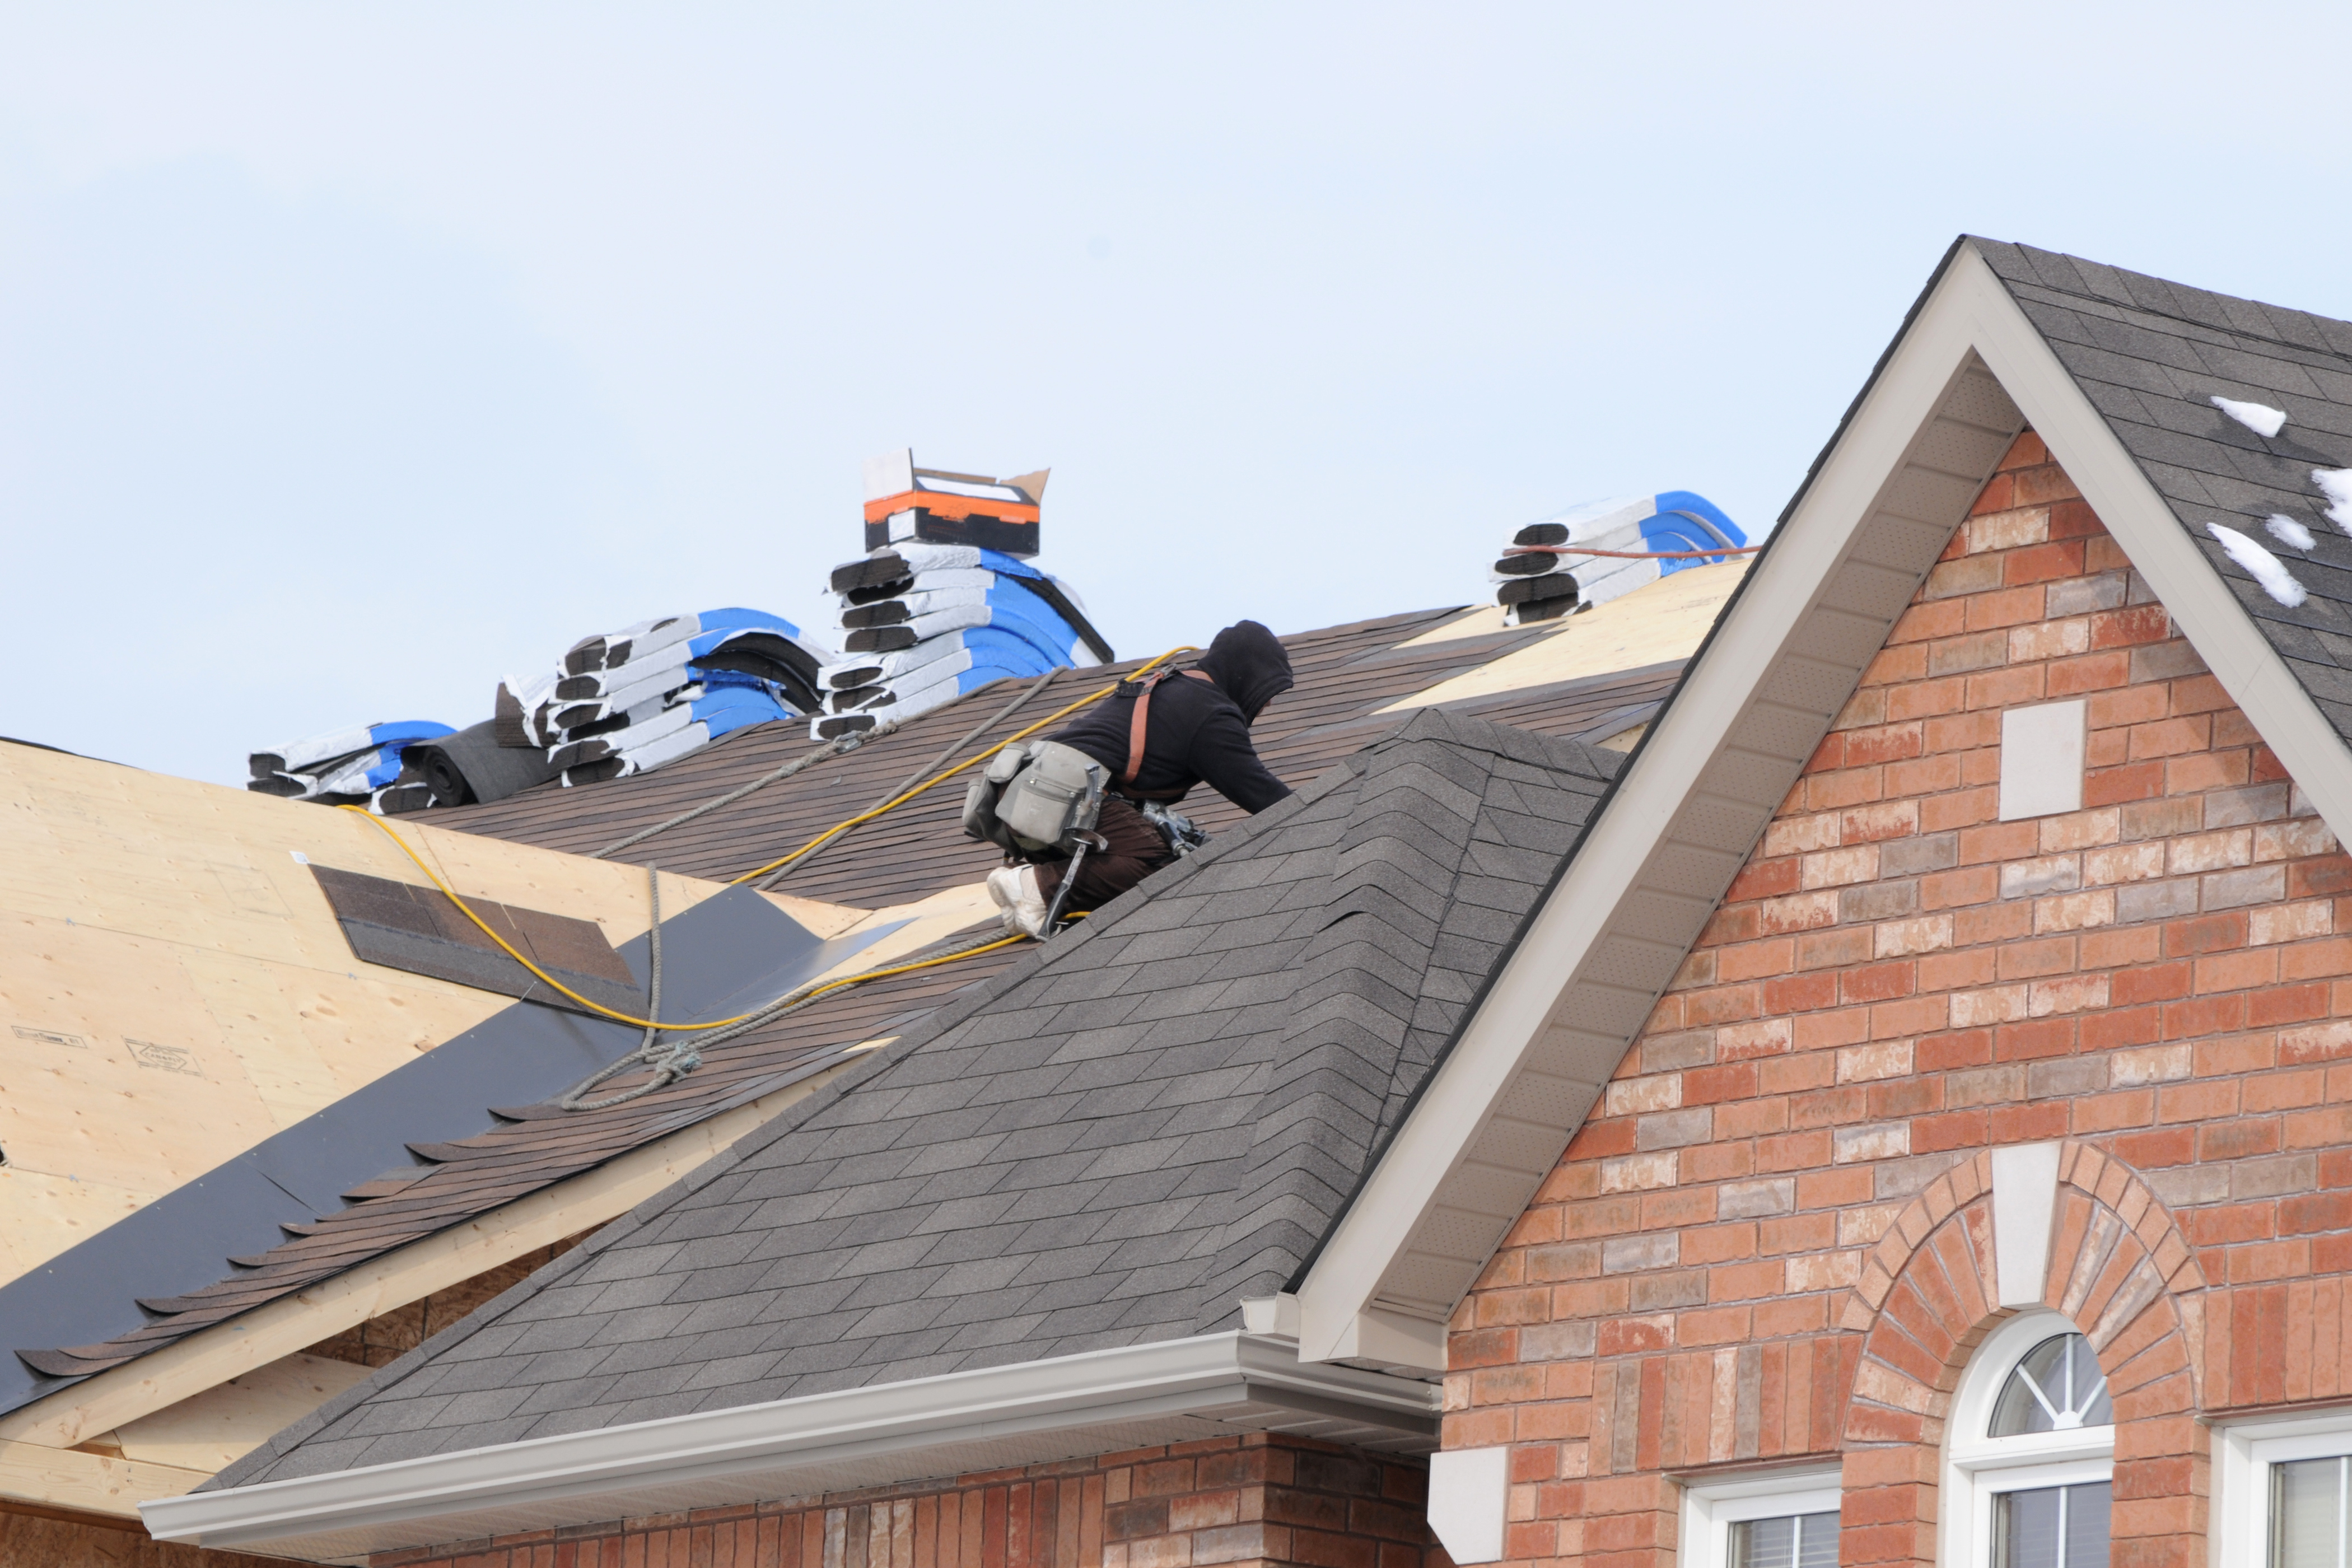 Call Titan Roofing Our Charleston Roofing Contractors Offer Repair Replacement Services 843-647-3183